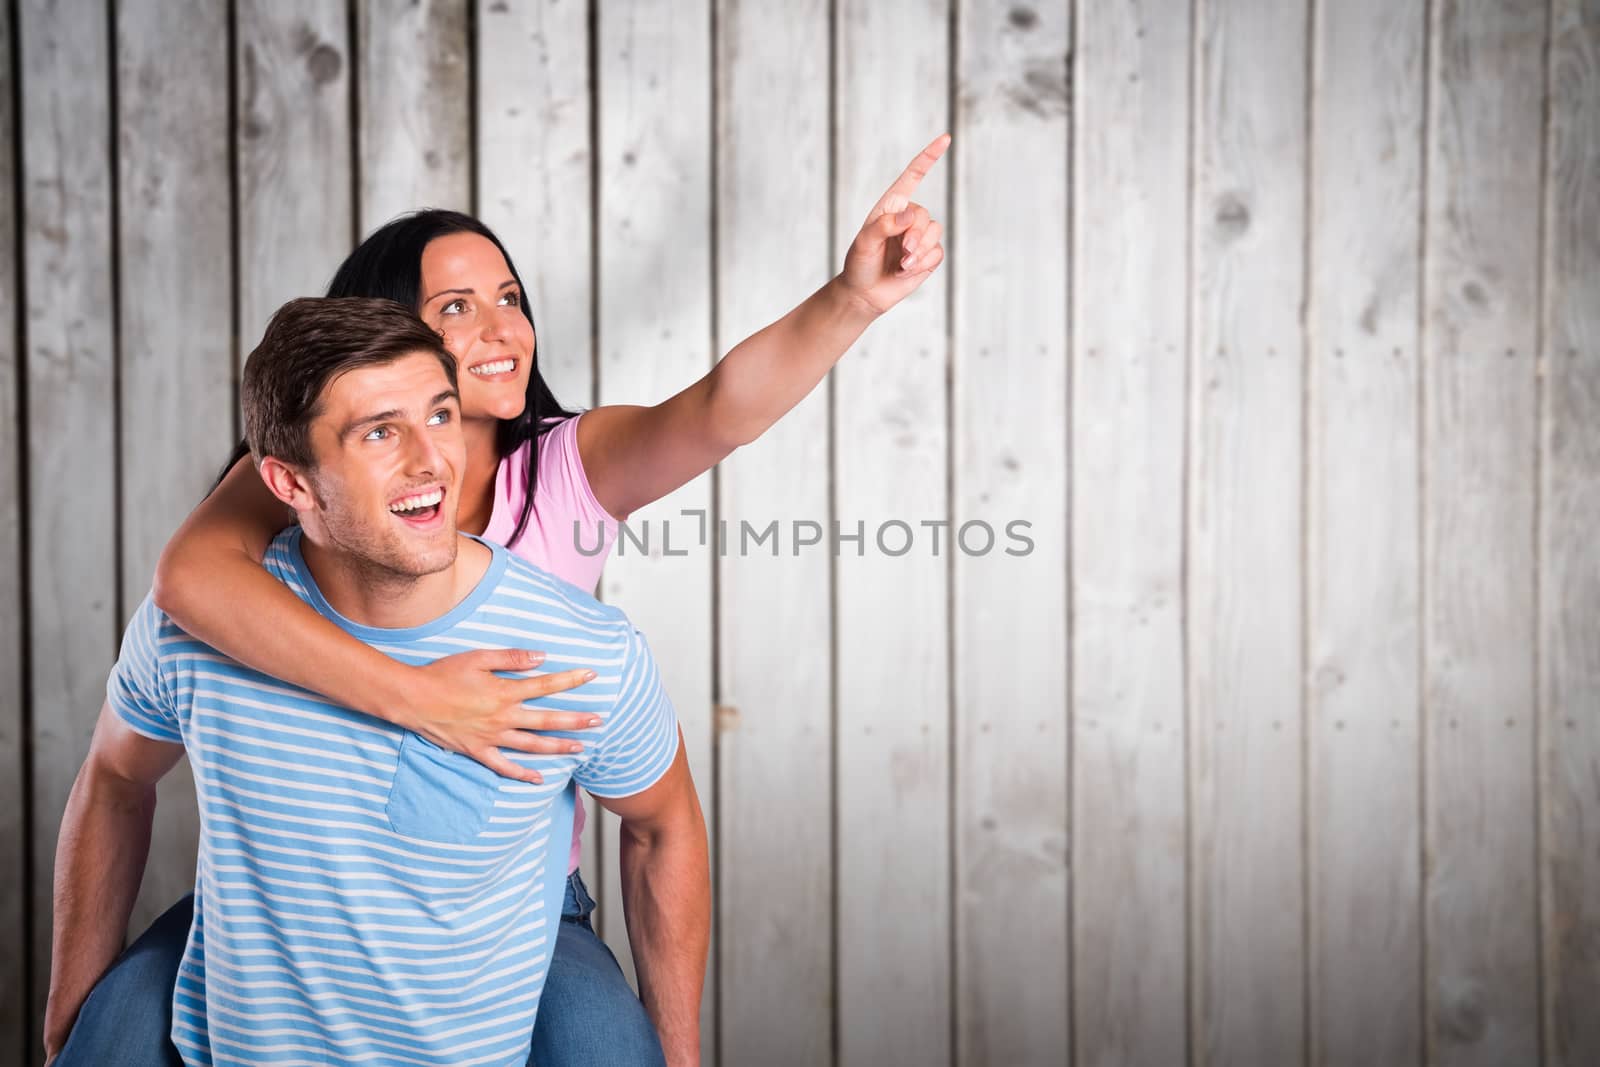 Young man giving girlfriend a piggyback ride against wooden planks